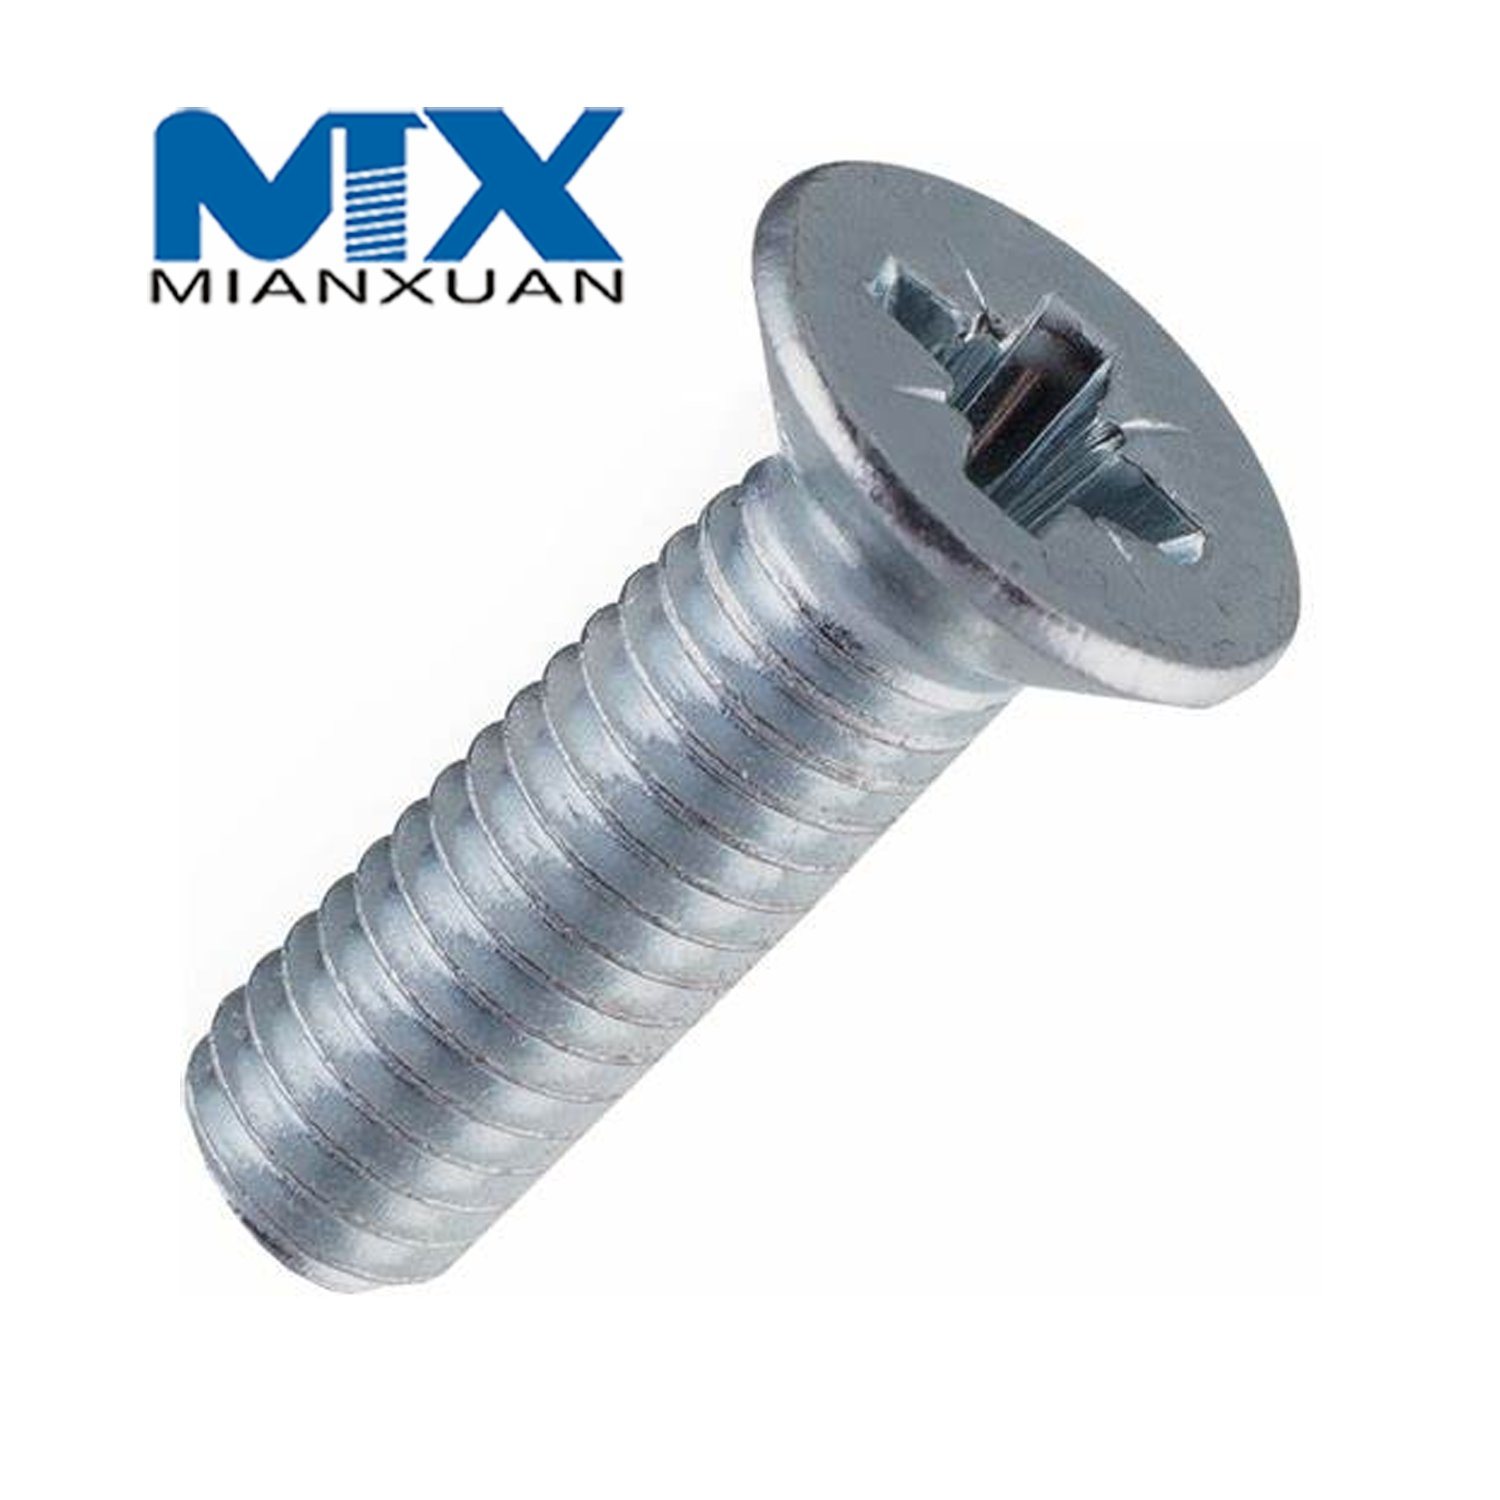 ISO14583 Screw Stainless Steel Standard Manufacturer A2 A4 18-8